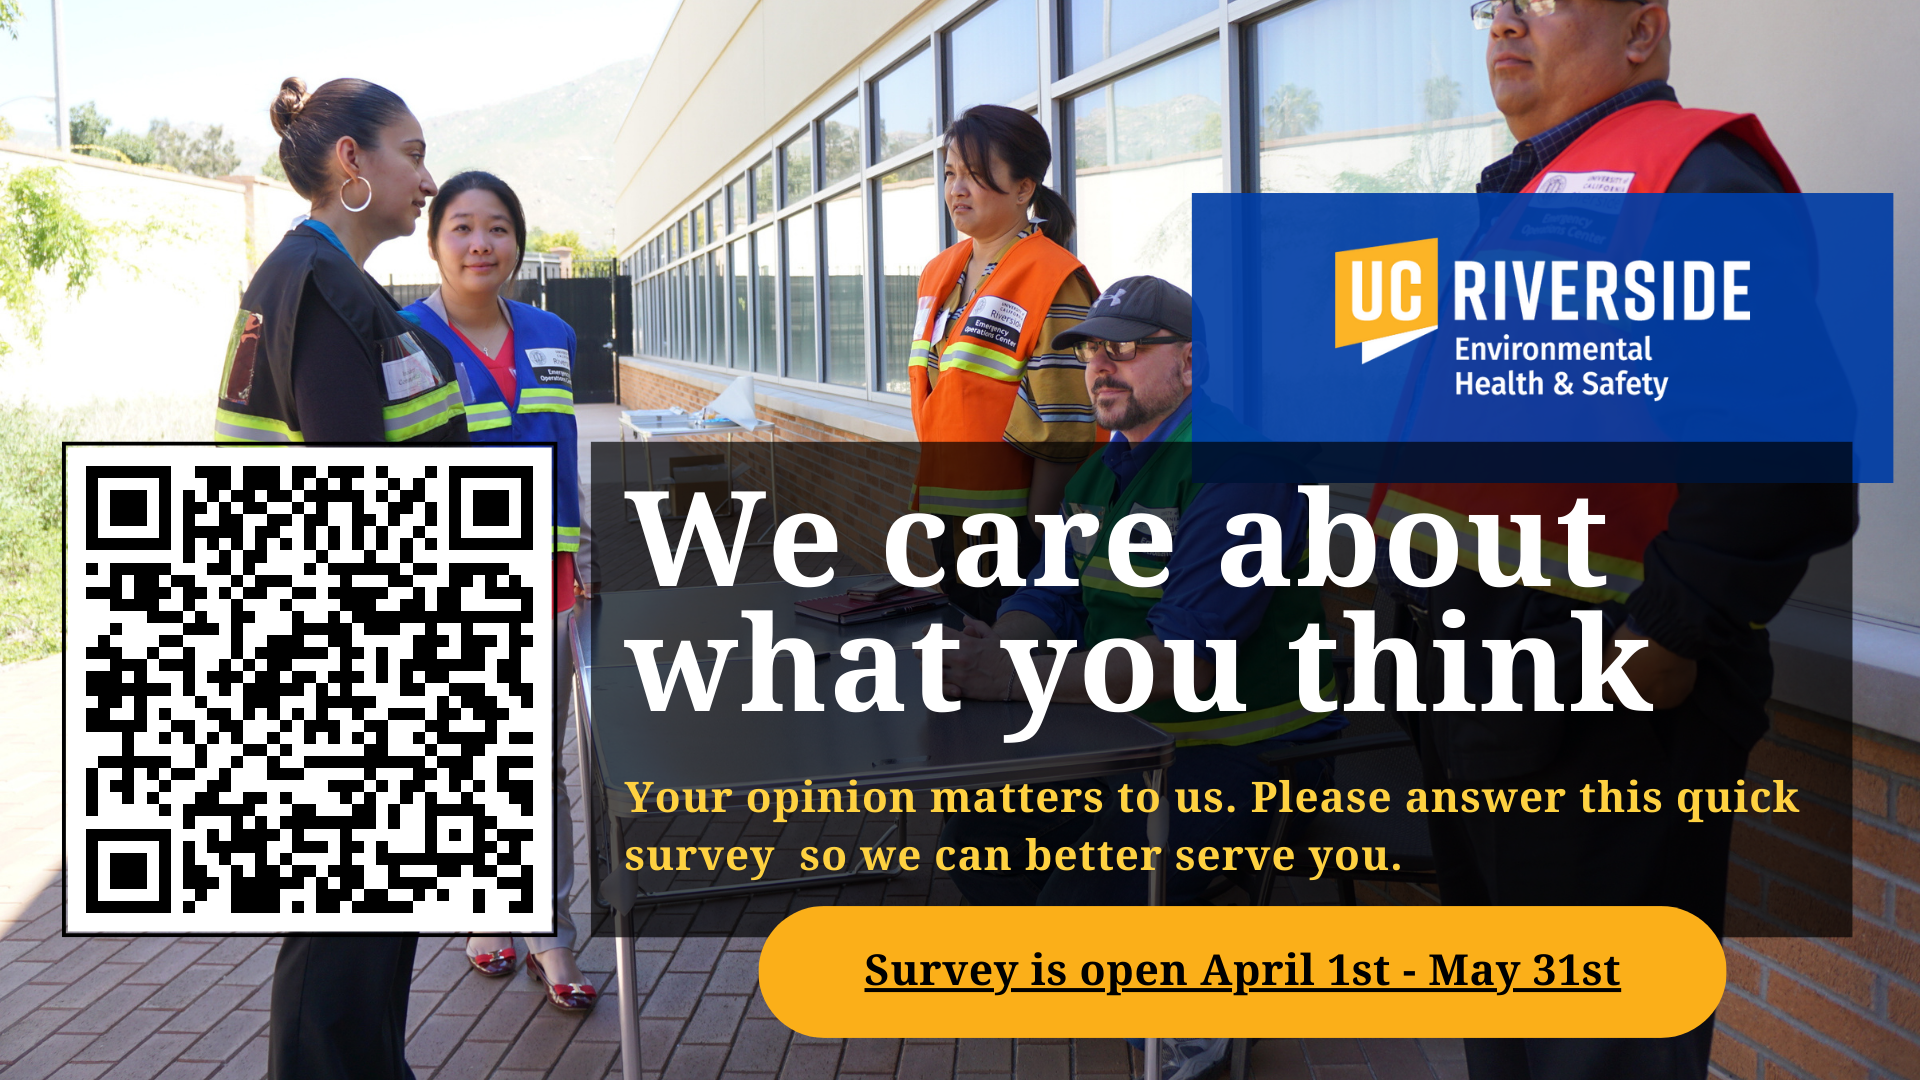 Group of five staff wearing emergency vests standing around a table and talking. QR Code and UC Riverside Environmental Health & Safety logo displays. Message on screen says, "We care about what you think. Your opinion matters to us. Please answer this quick survey so we can better serve you. Survey is open April 1st - May 31st.